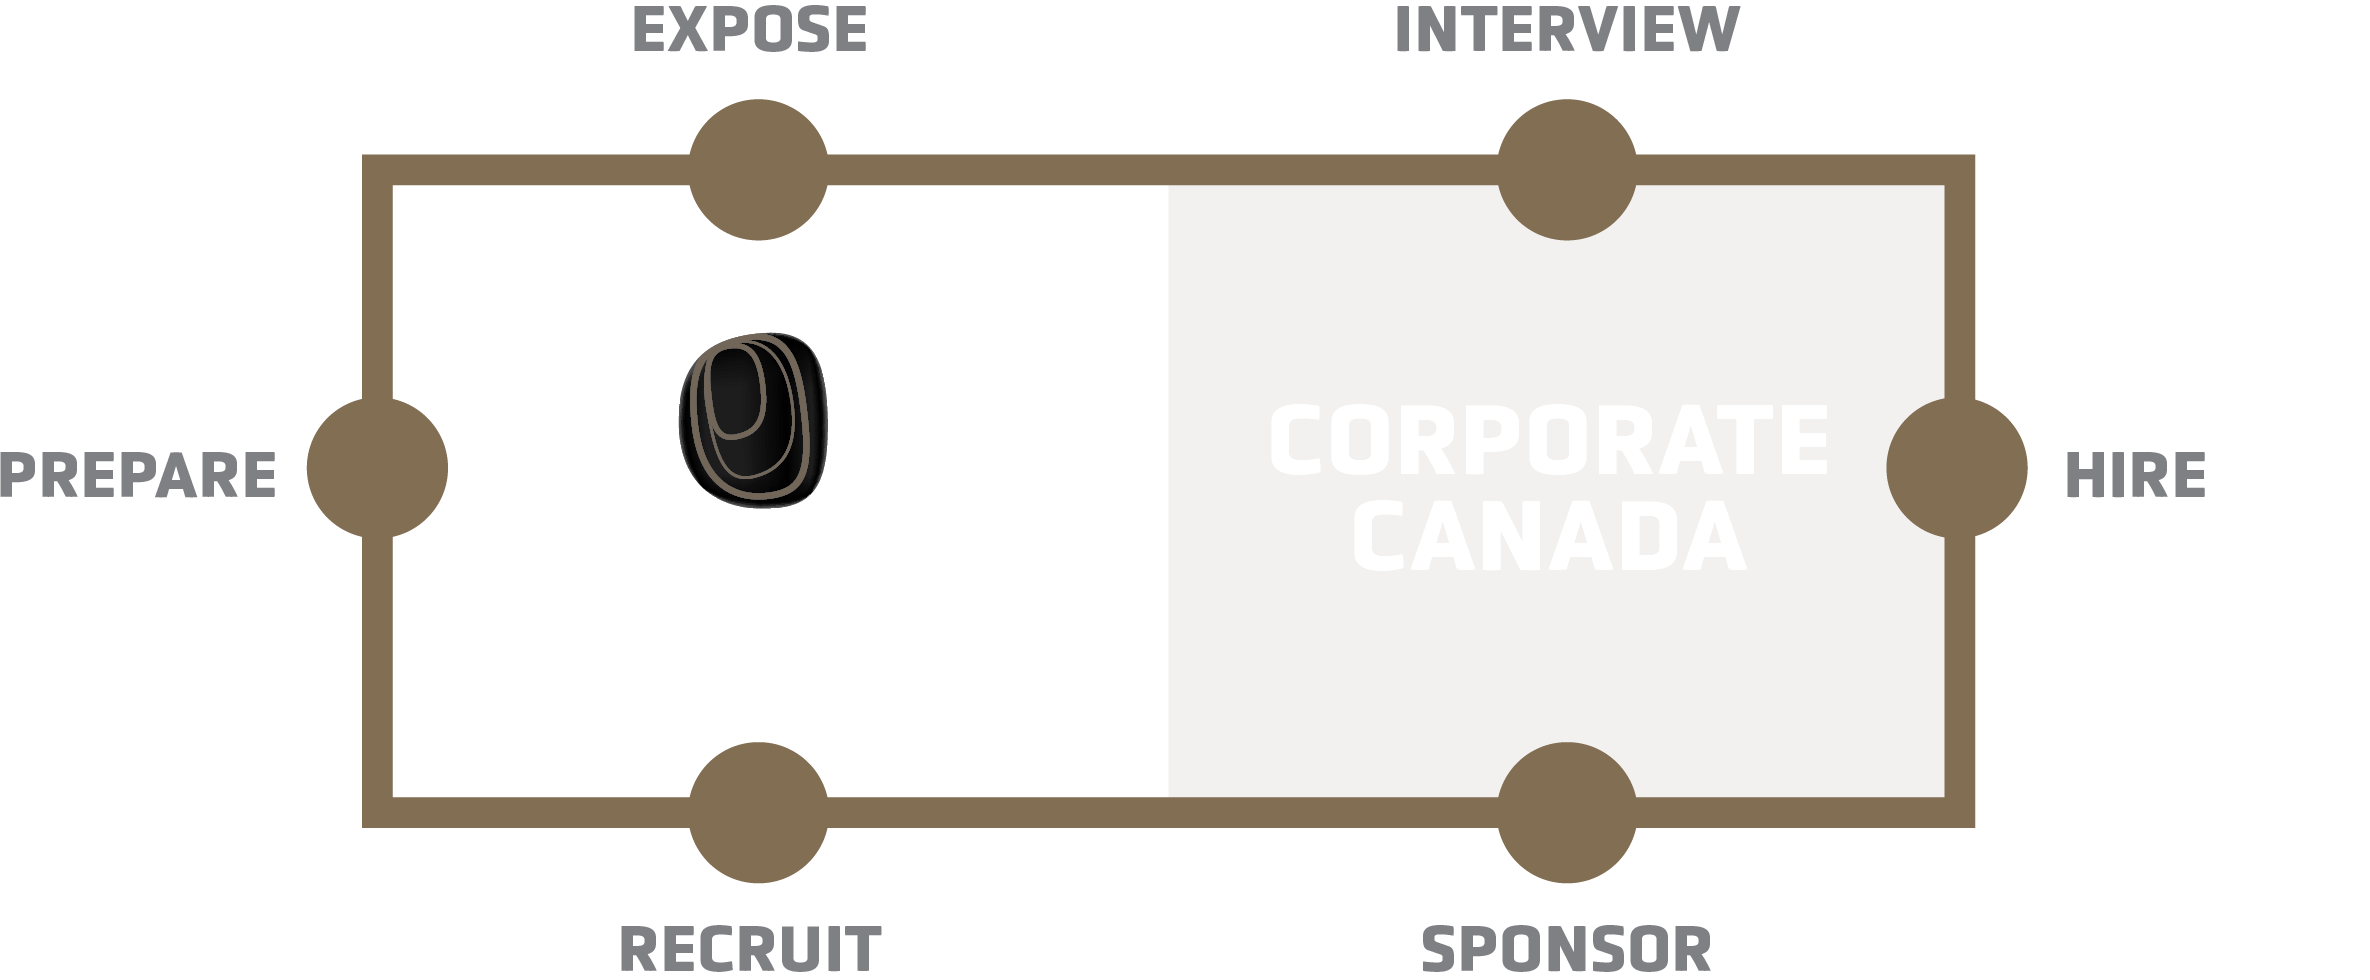 Onyx process map displaying the method of integrating Onyx participants into corporate North America